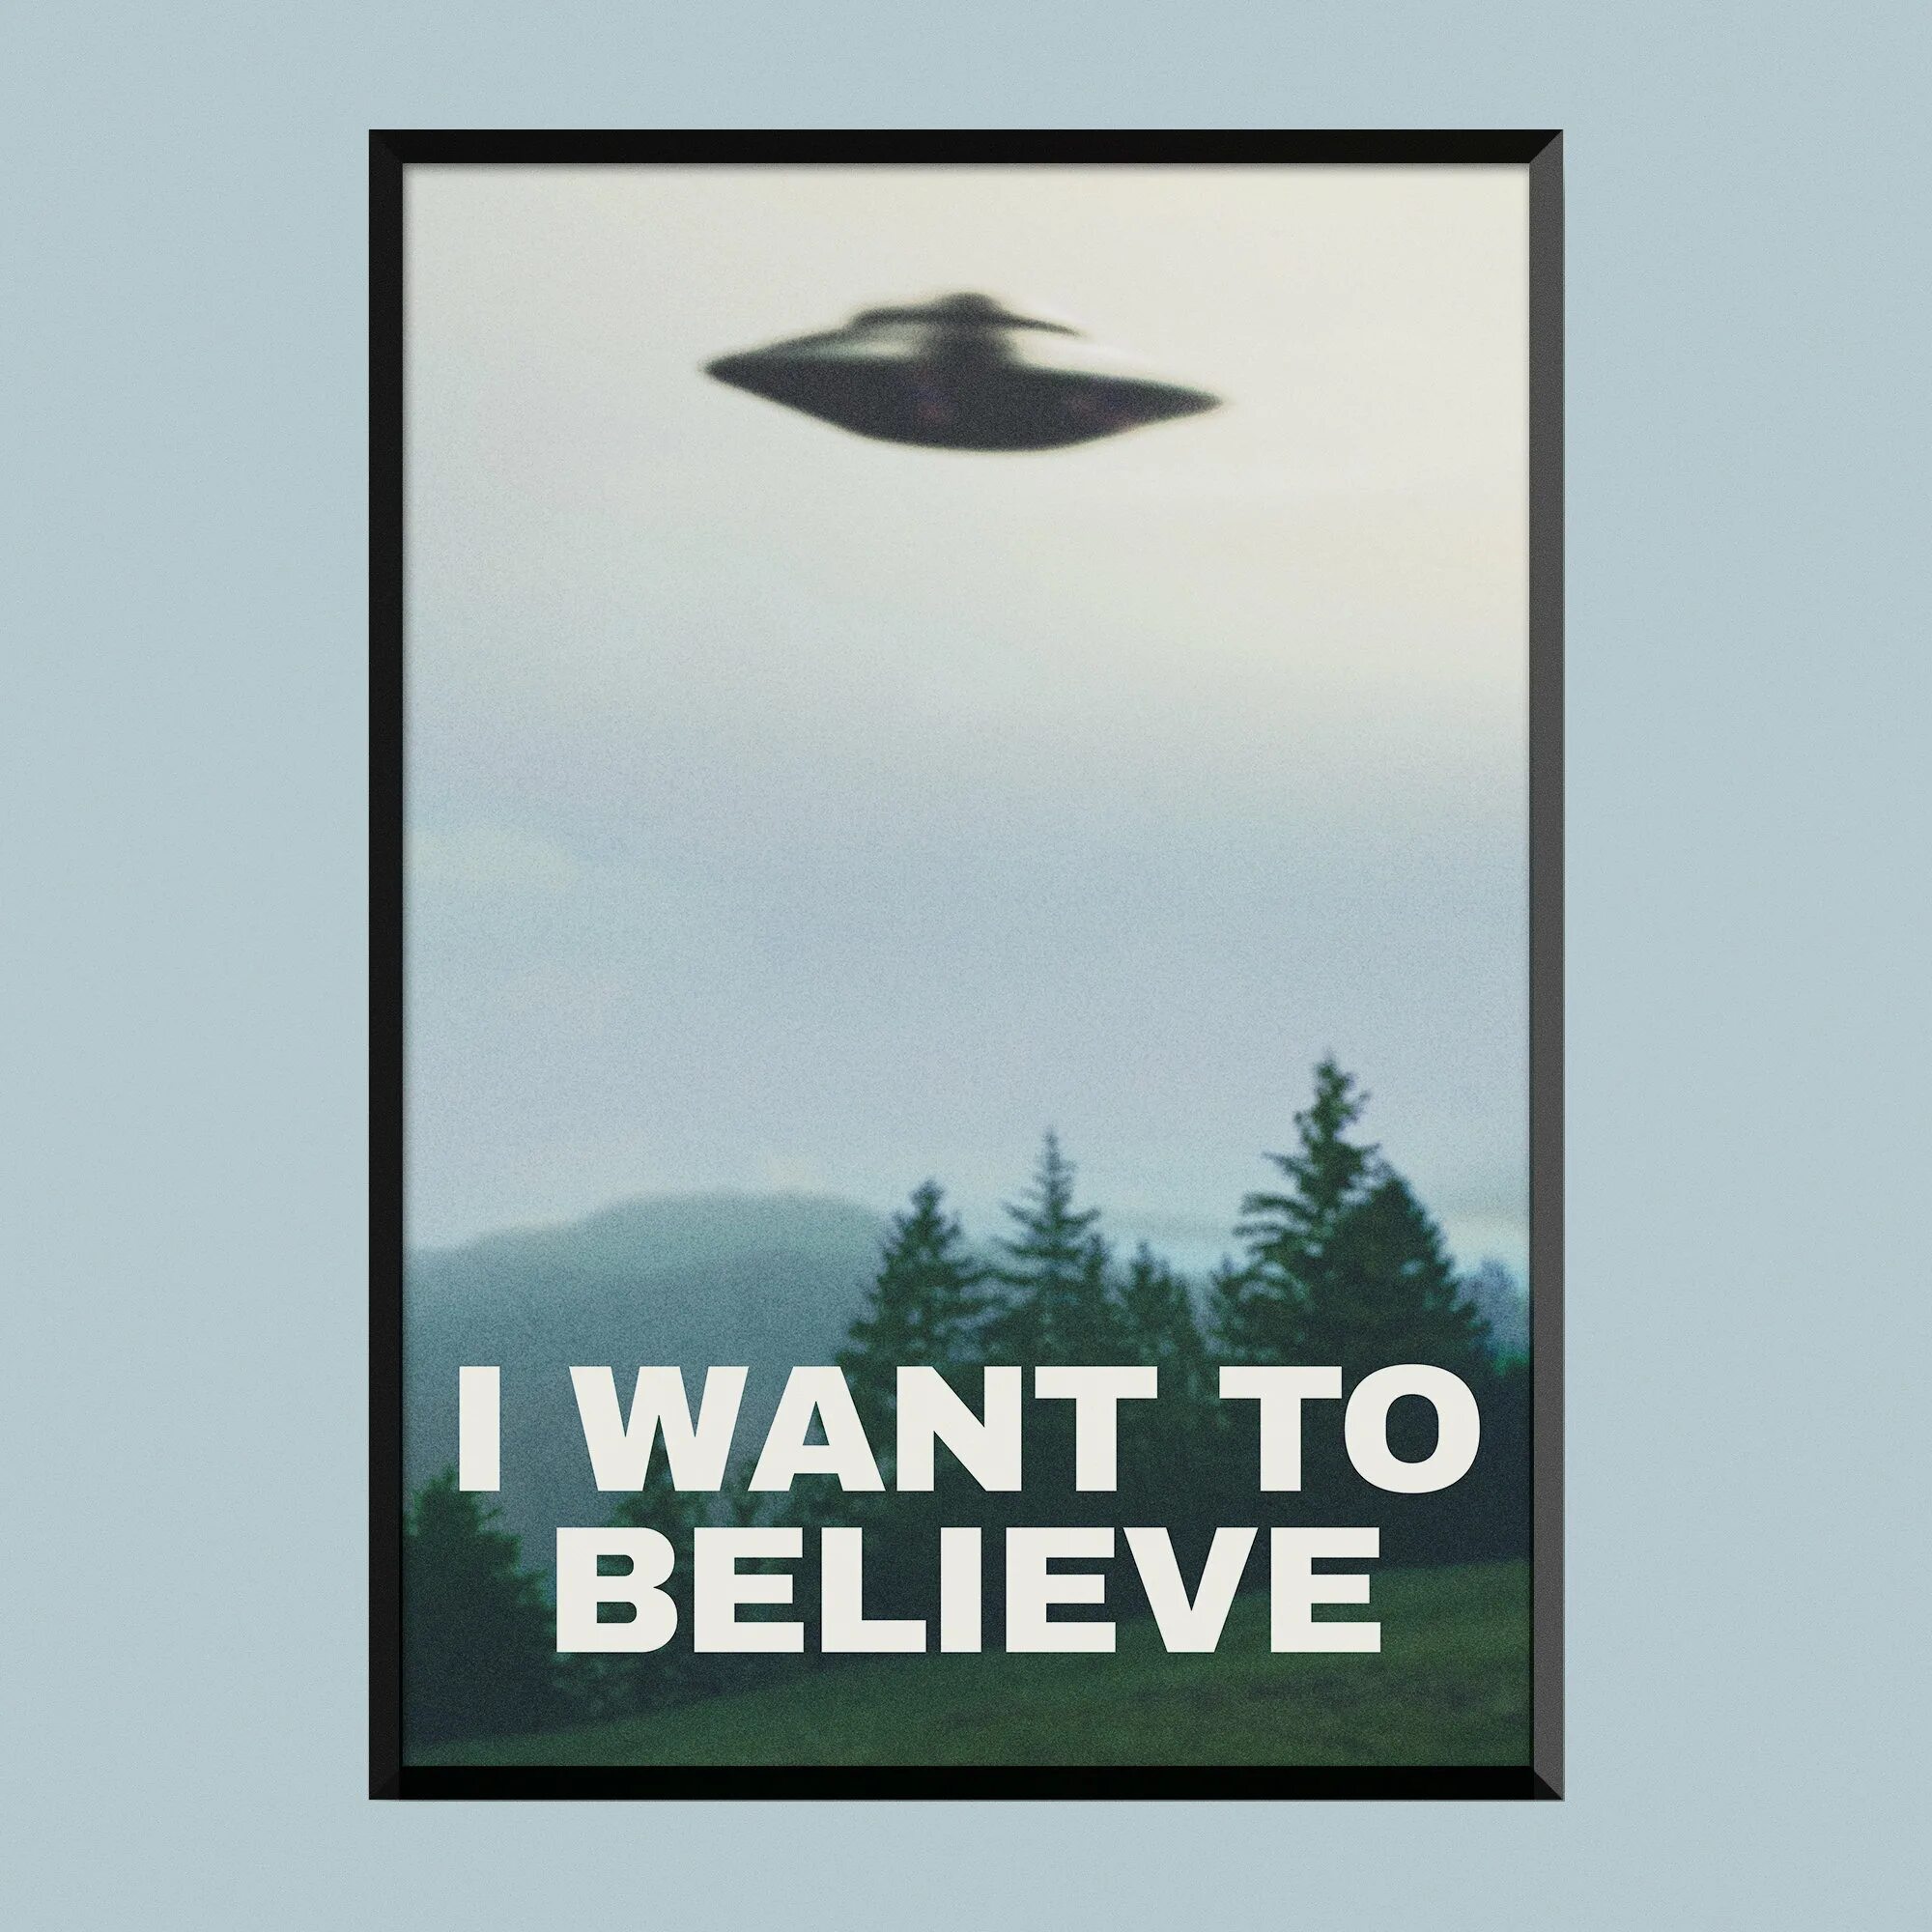 Started to believe. Секретные материалы Постер i want to believe. Секретные материалы i want to believe у Малдера. X files i want to believe плакат. Плакат с НЛО I want to believe.